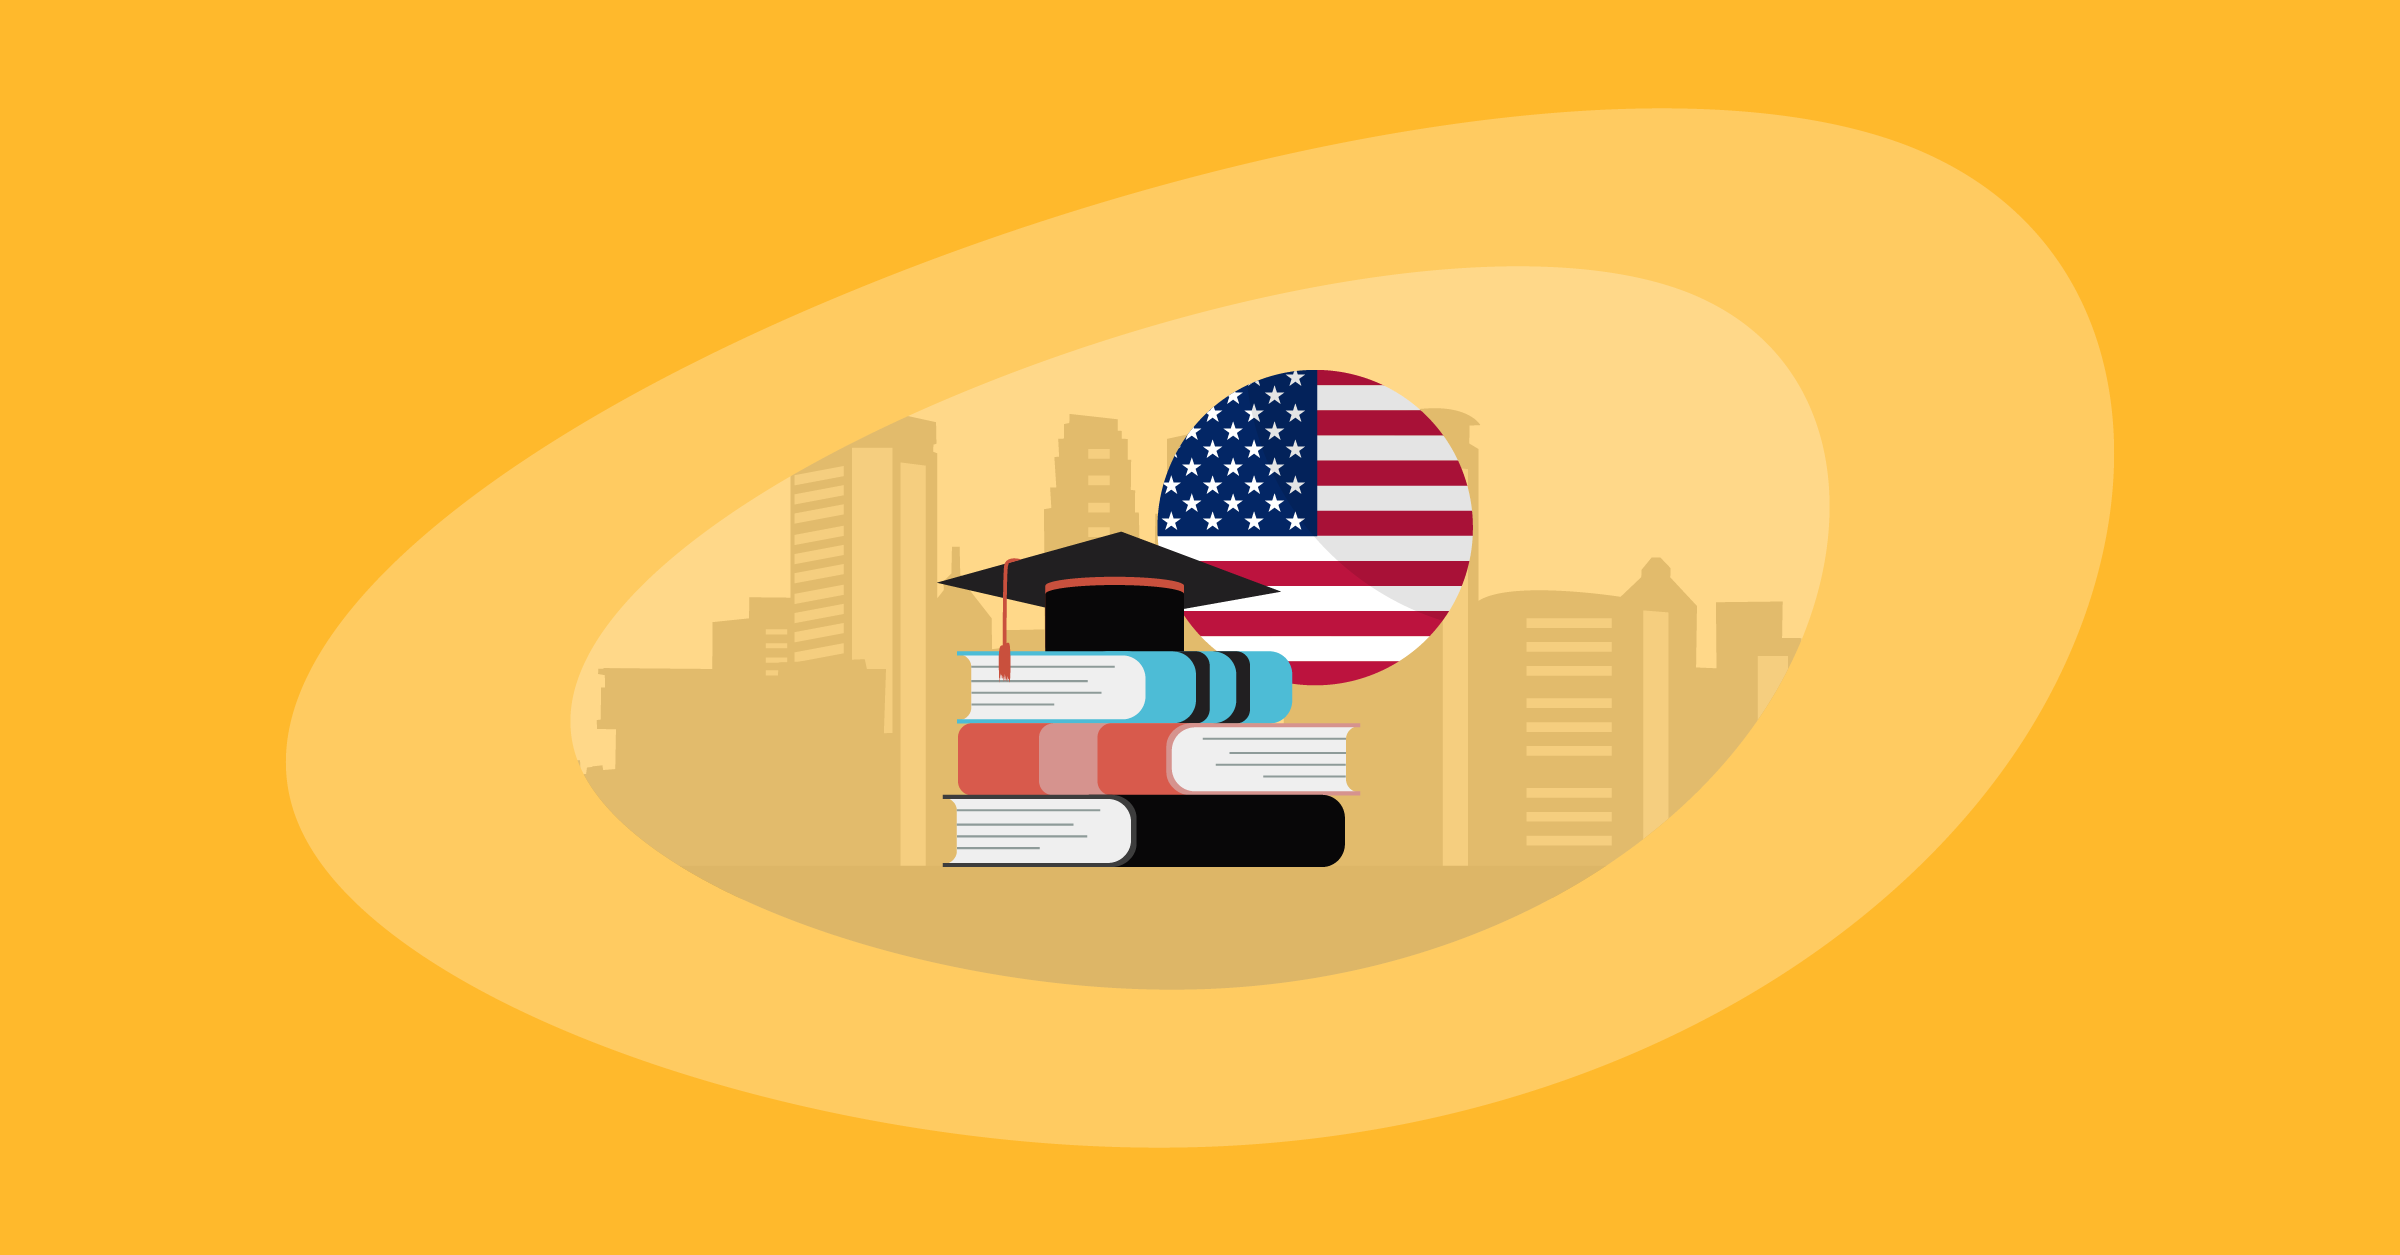 Illustration of books and graduation hat in front of an American flag